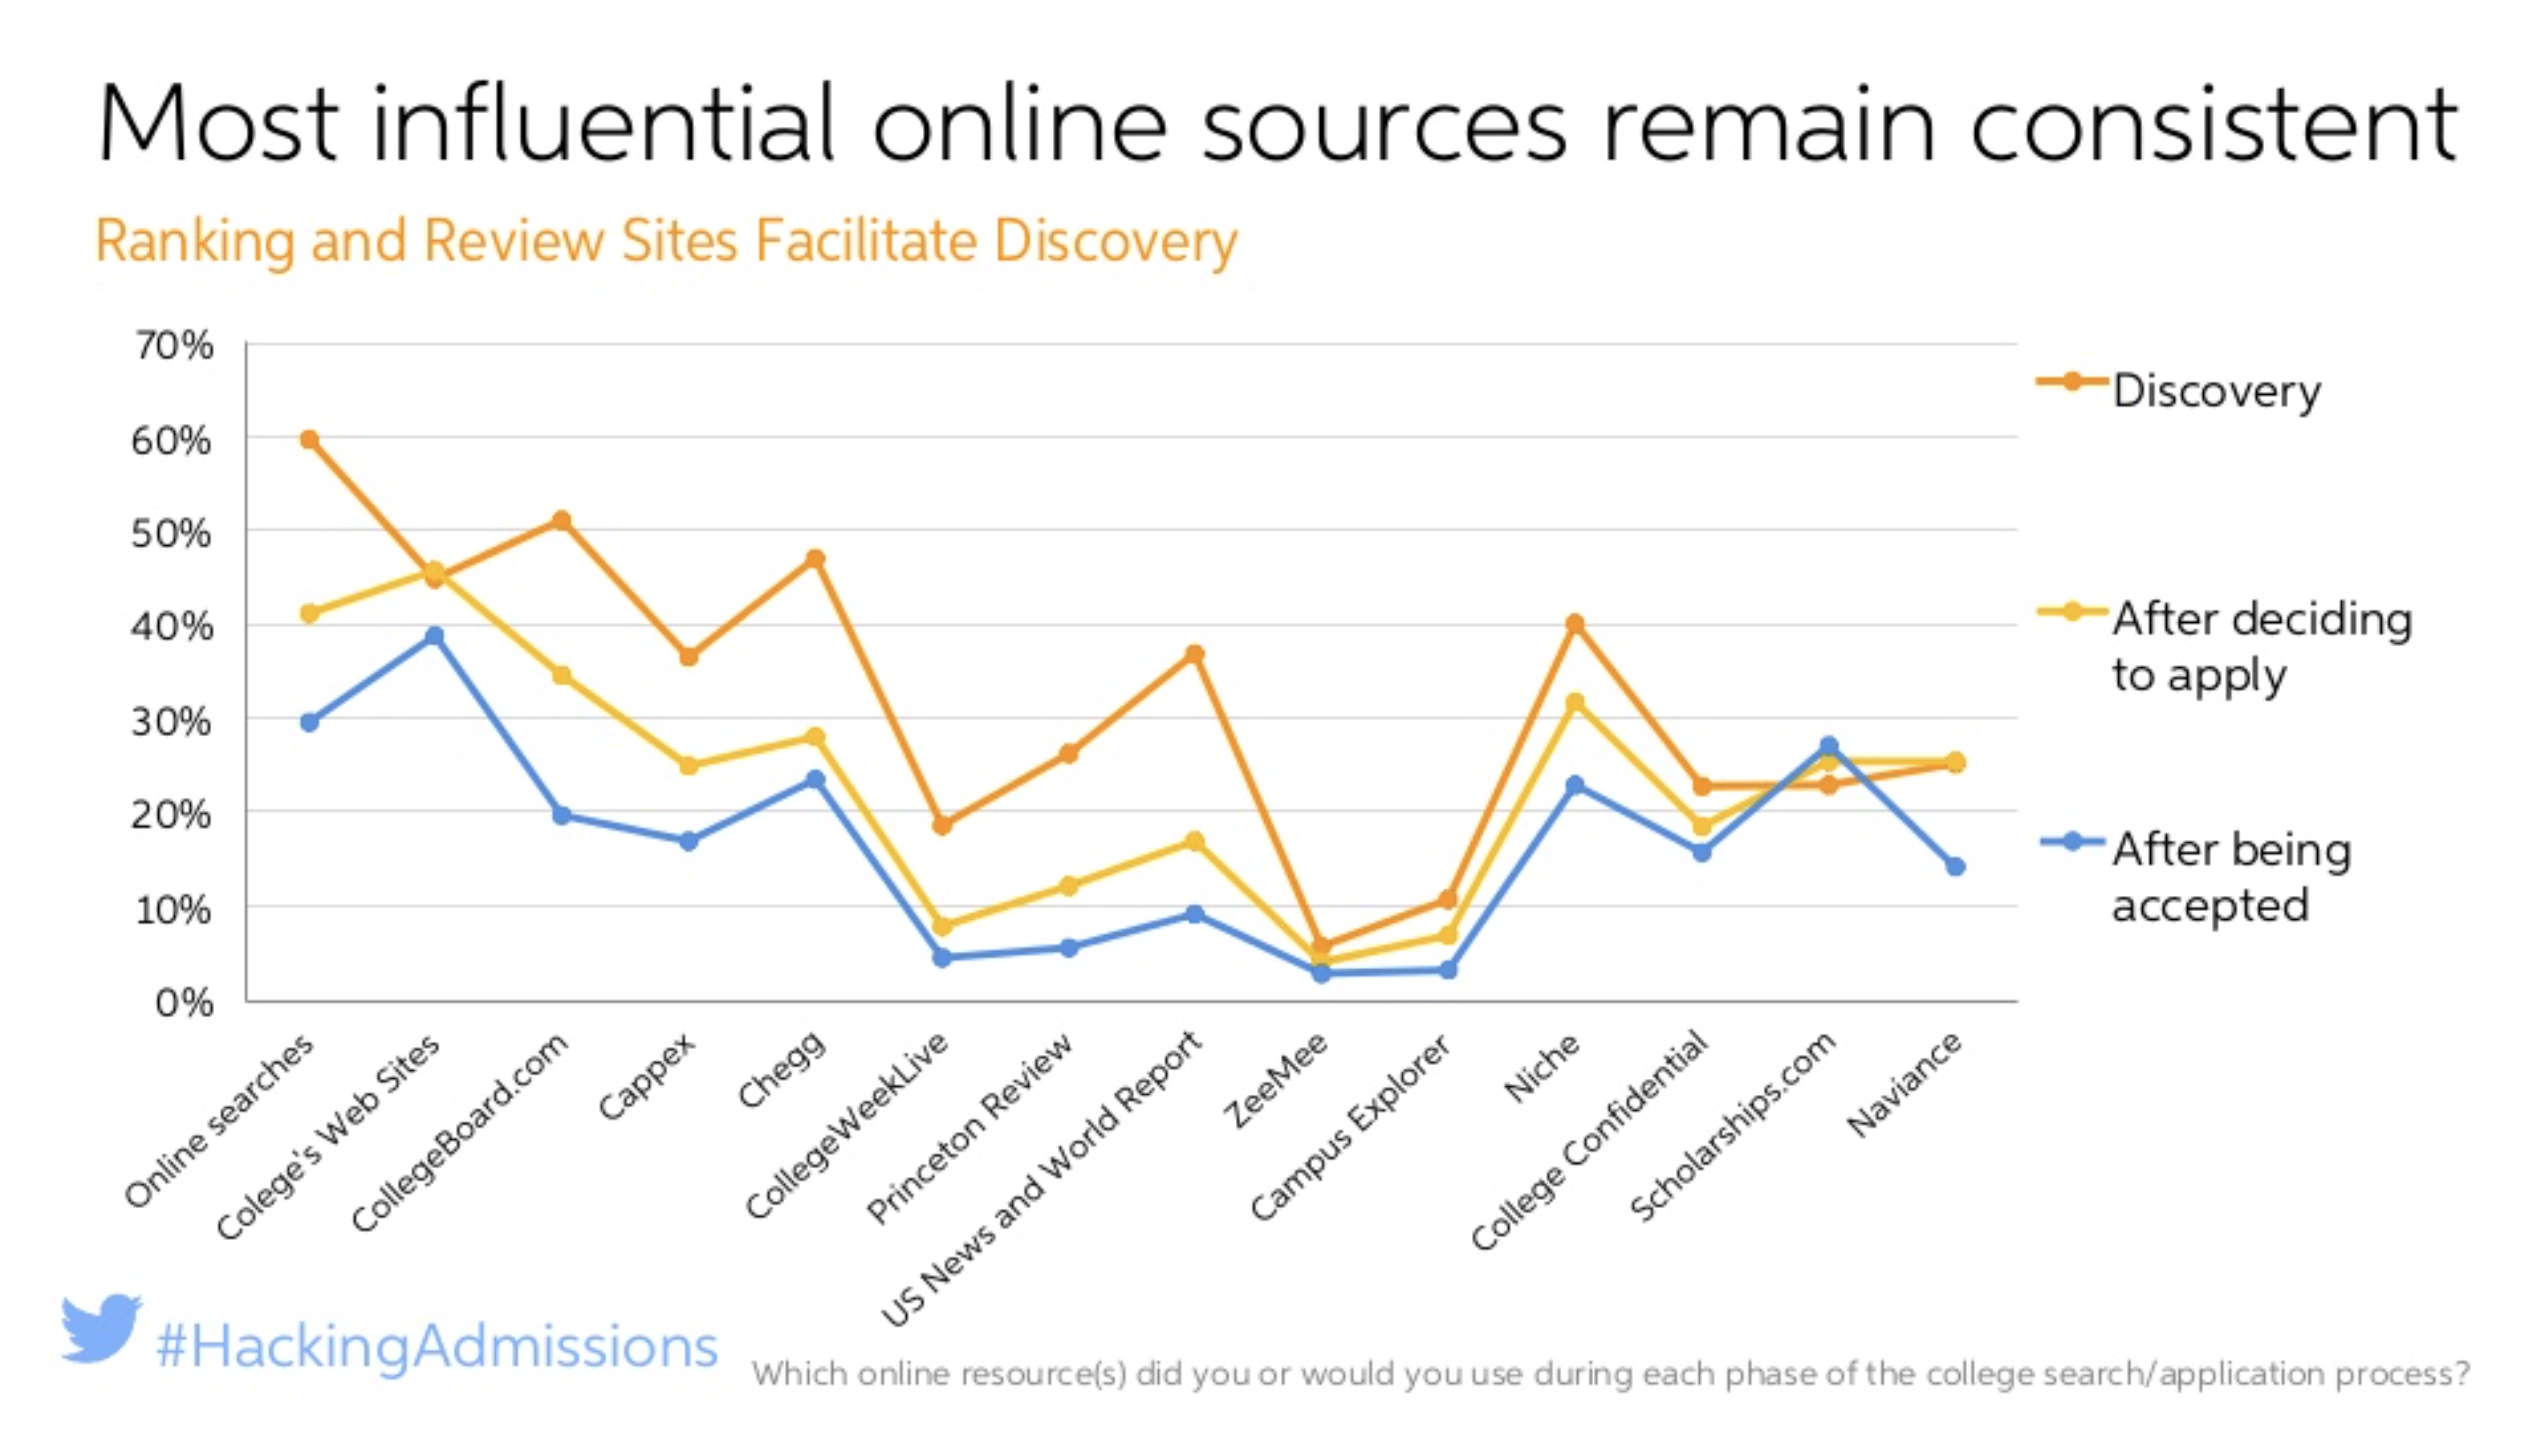 online survey results, search engines main way students discover university